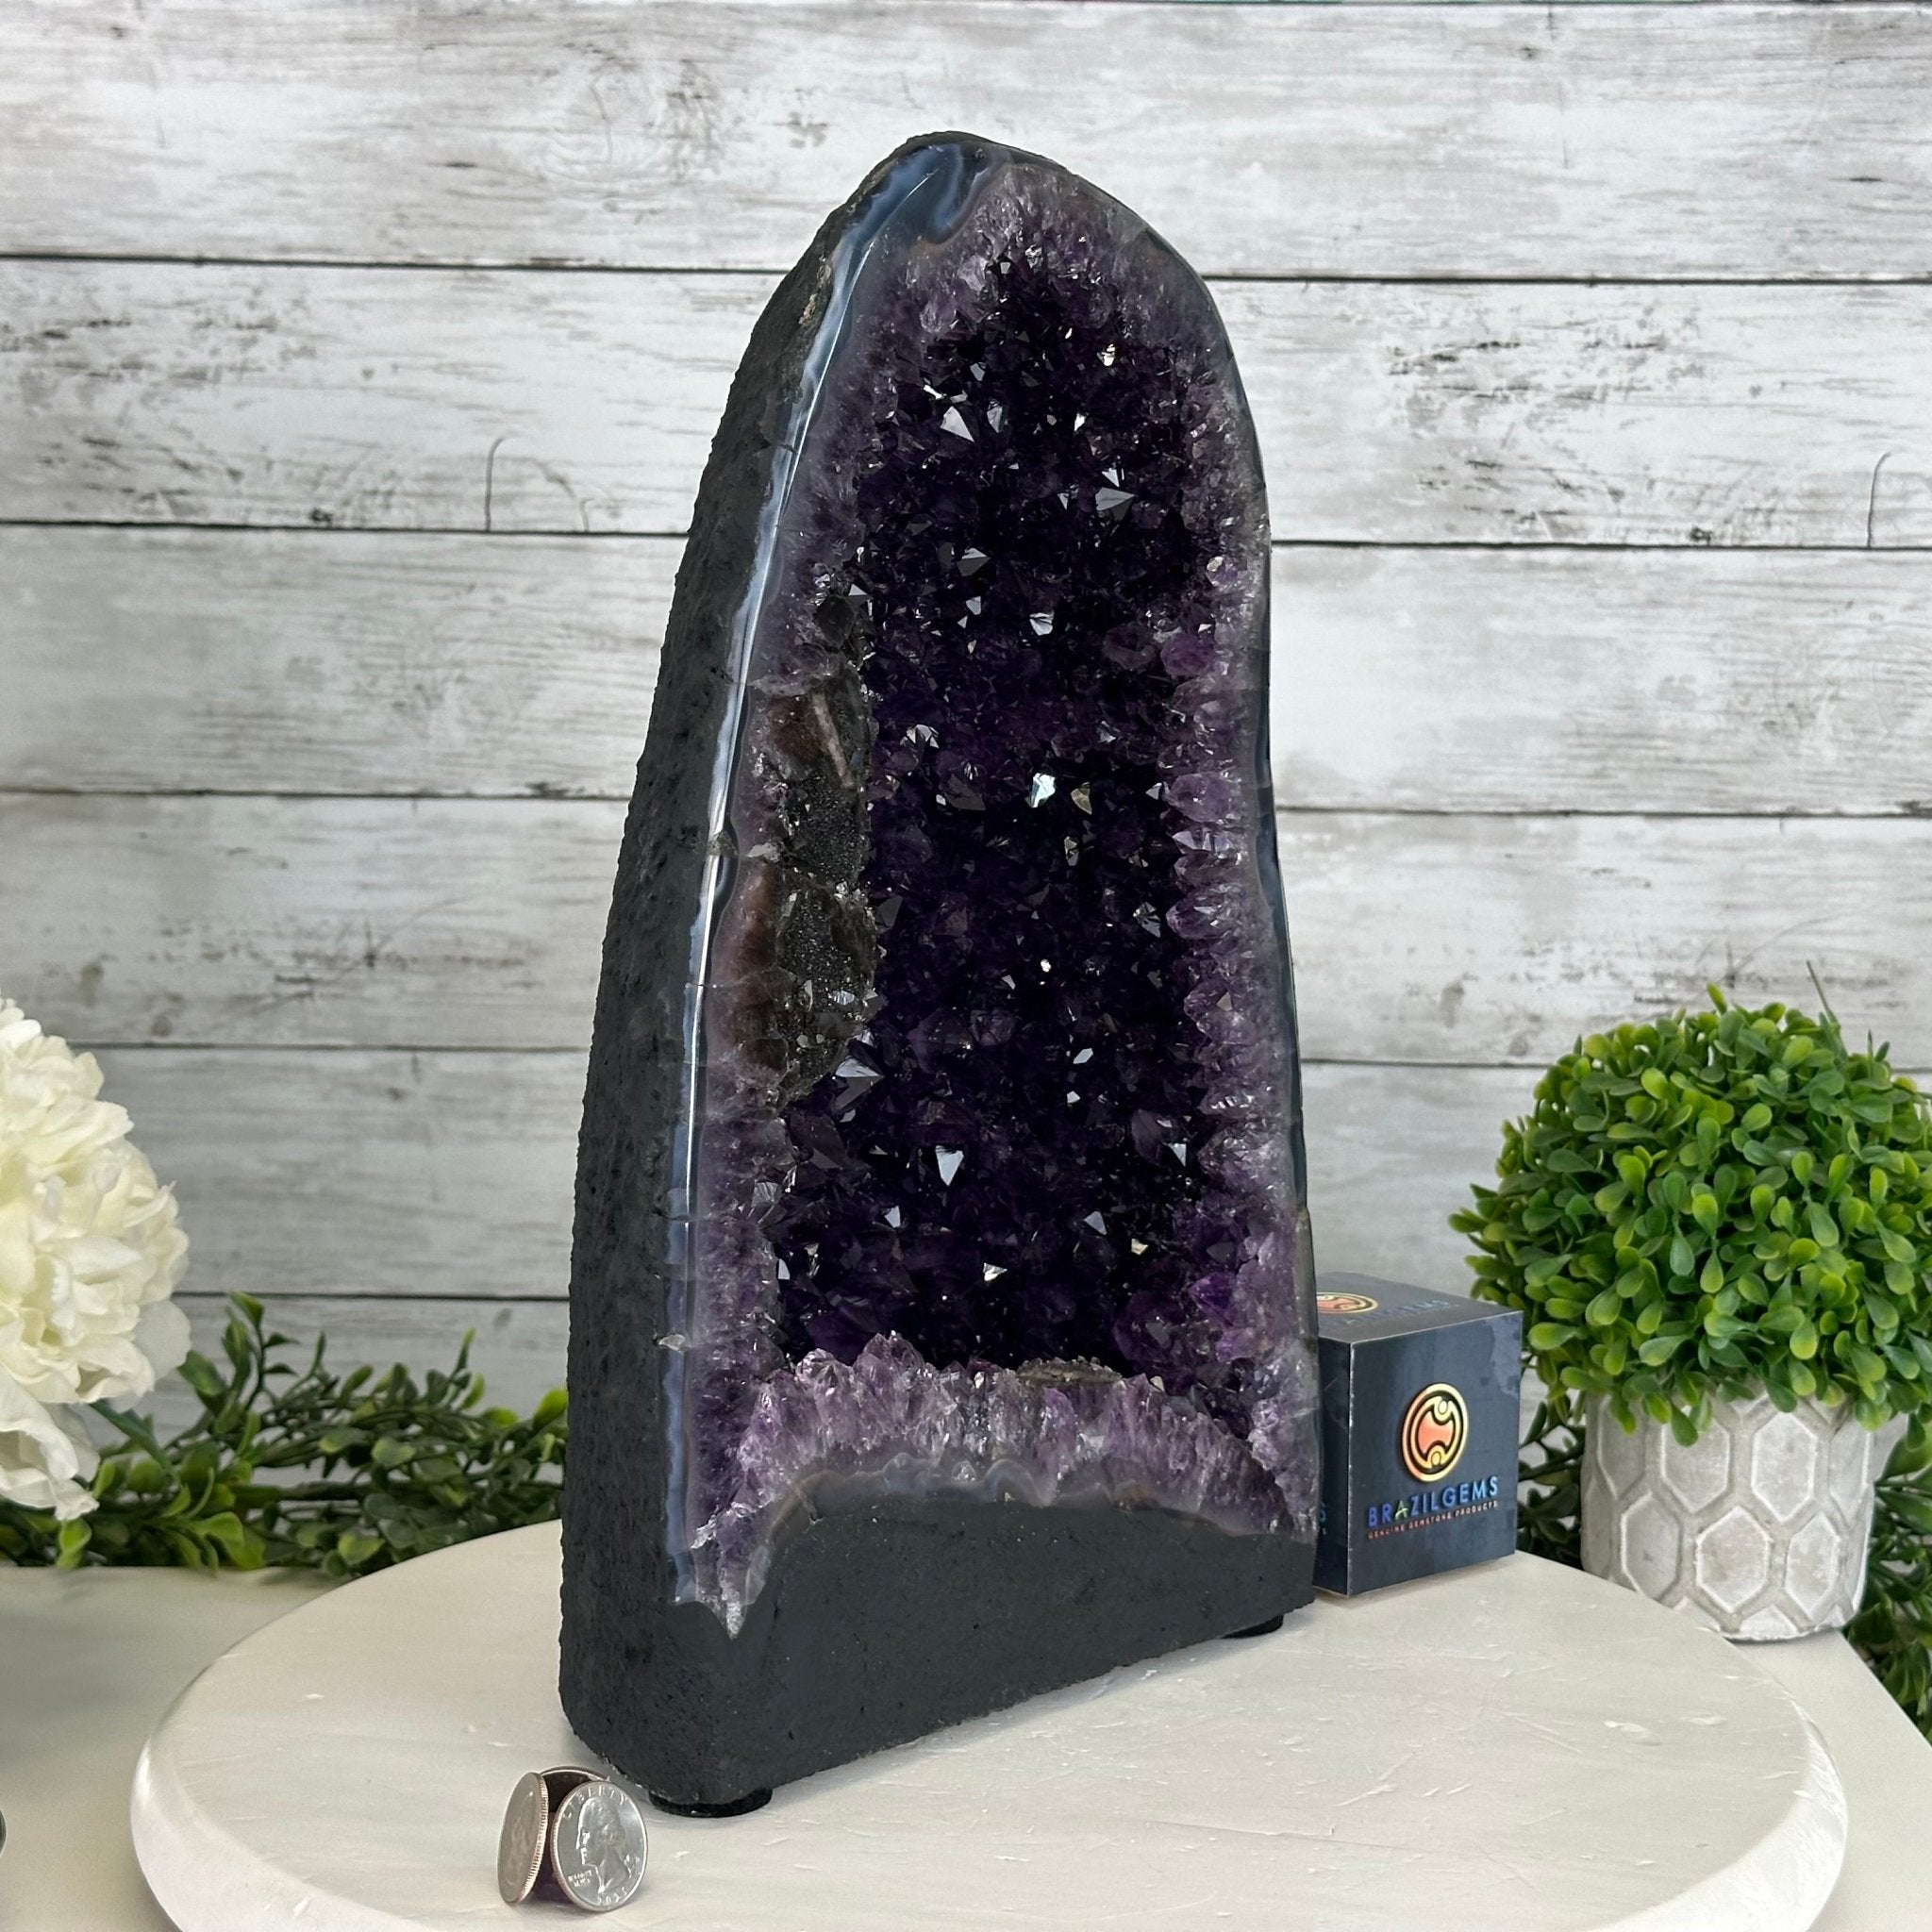 Quality Brazilian Amethyst Cathedral, 17.4 lbs & 13.5" Tall, #5601 - 1374 - Brazil GemsBrazil GemsQuality Brazilian Amethyst Cathedral, 17.4 lbs & 13.5" Tall, #5601 - 1374Cathedrals5601 - 1374